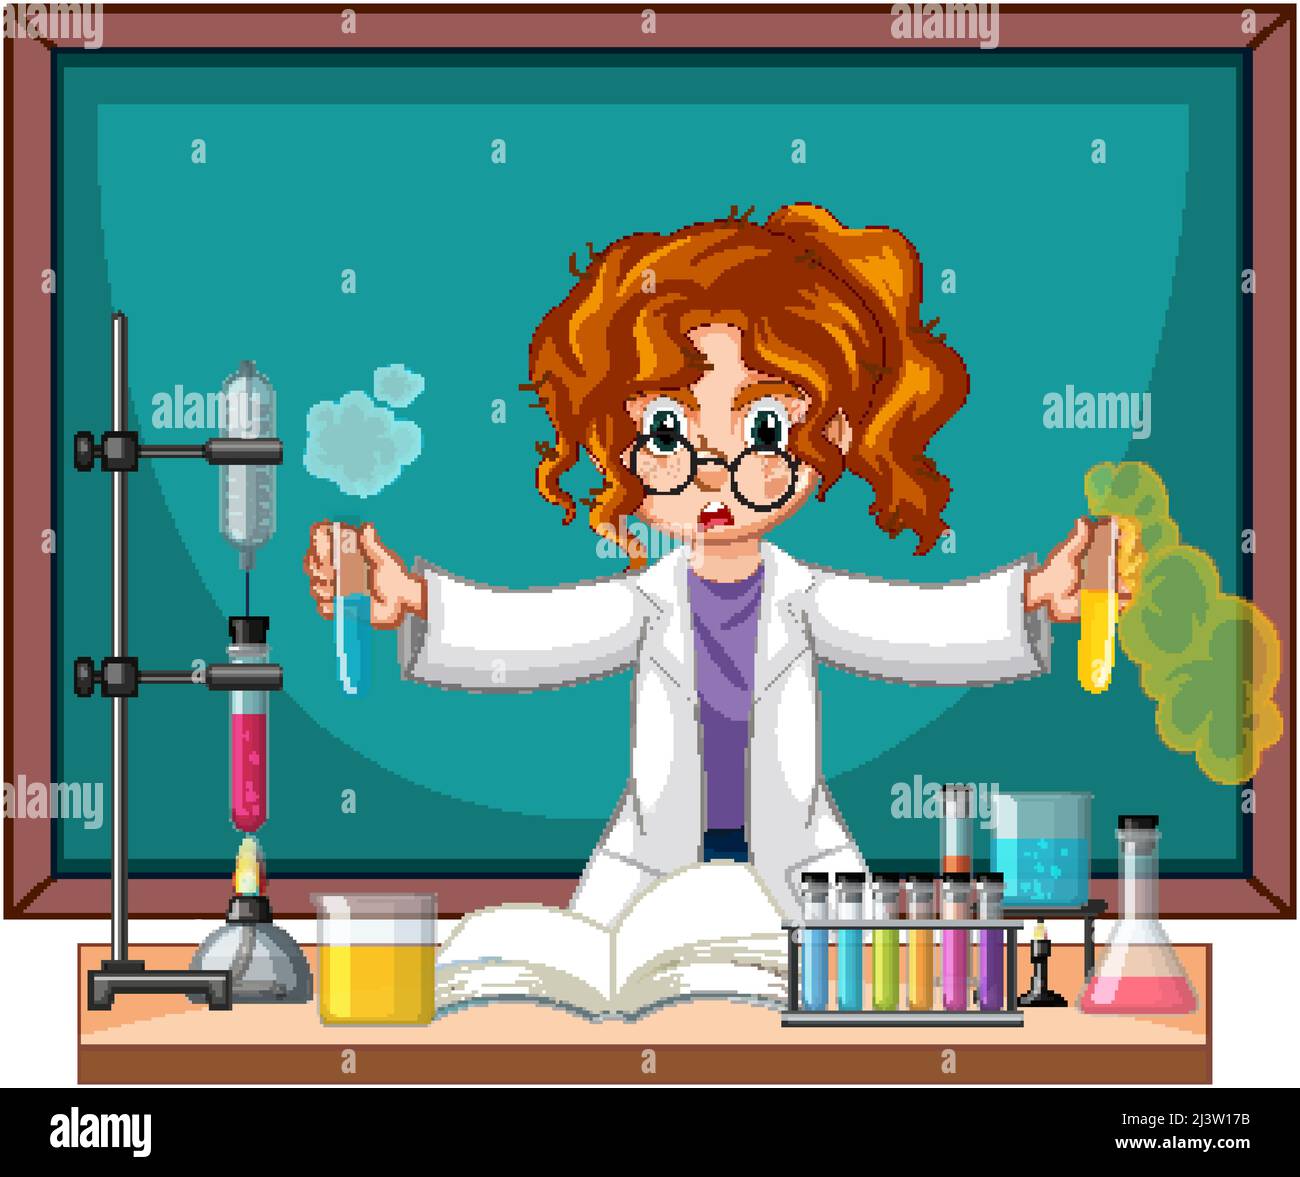 A chemist experiment with blackboard illustration Stock Vector